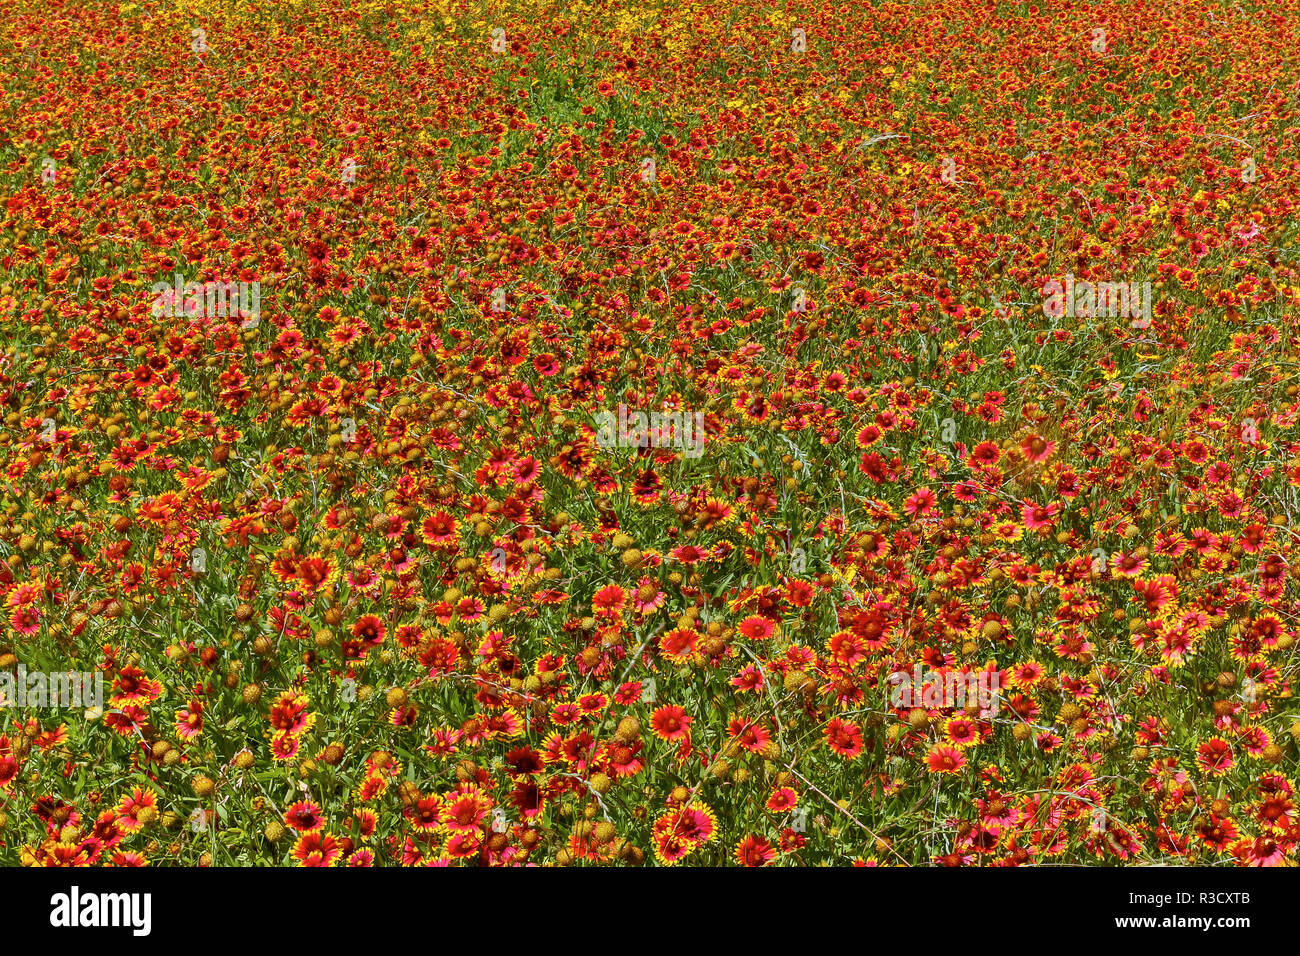 Indian Blanket Flower in mass planting and bloom at entrance to town of Fredericksburg, Texas Stock Photo